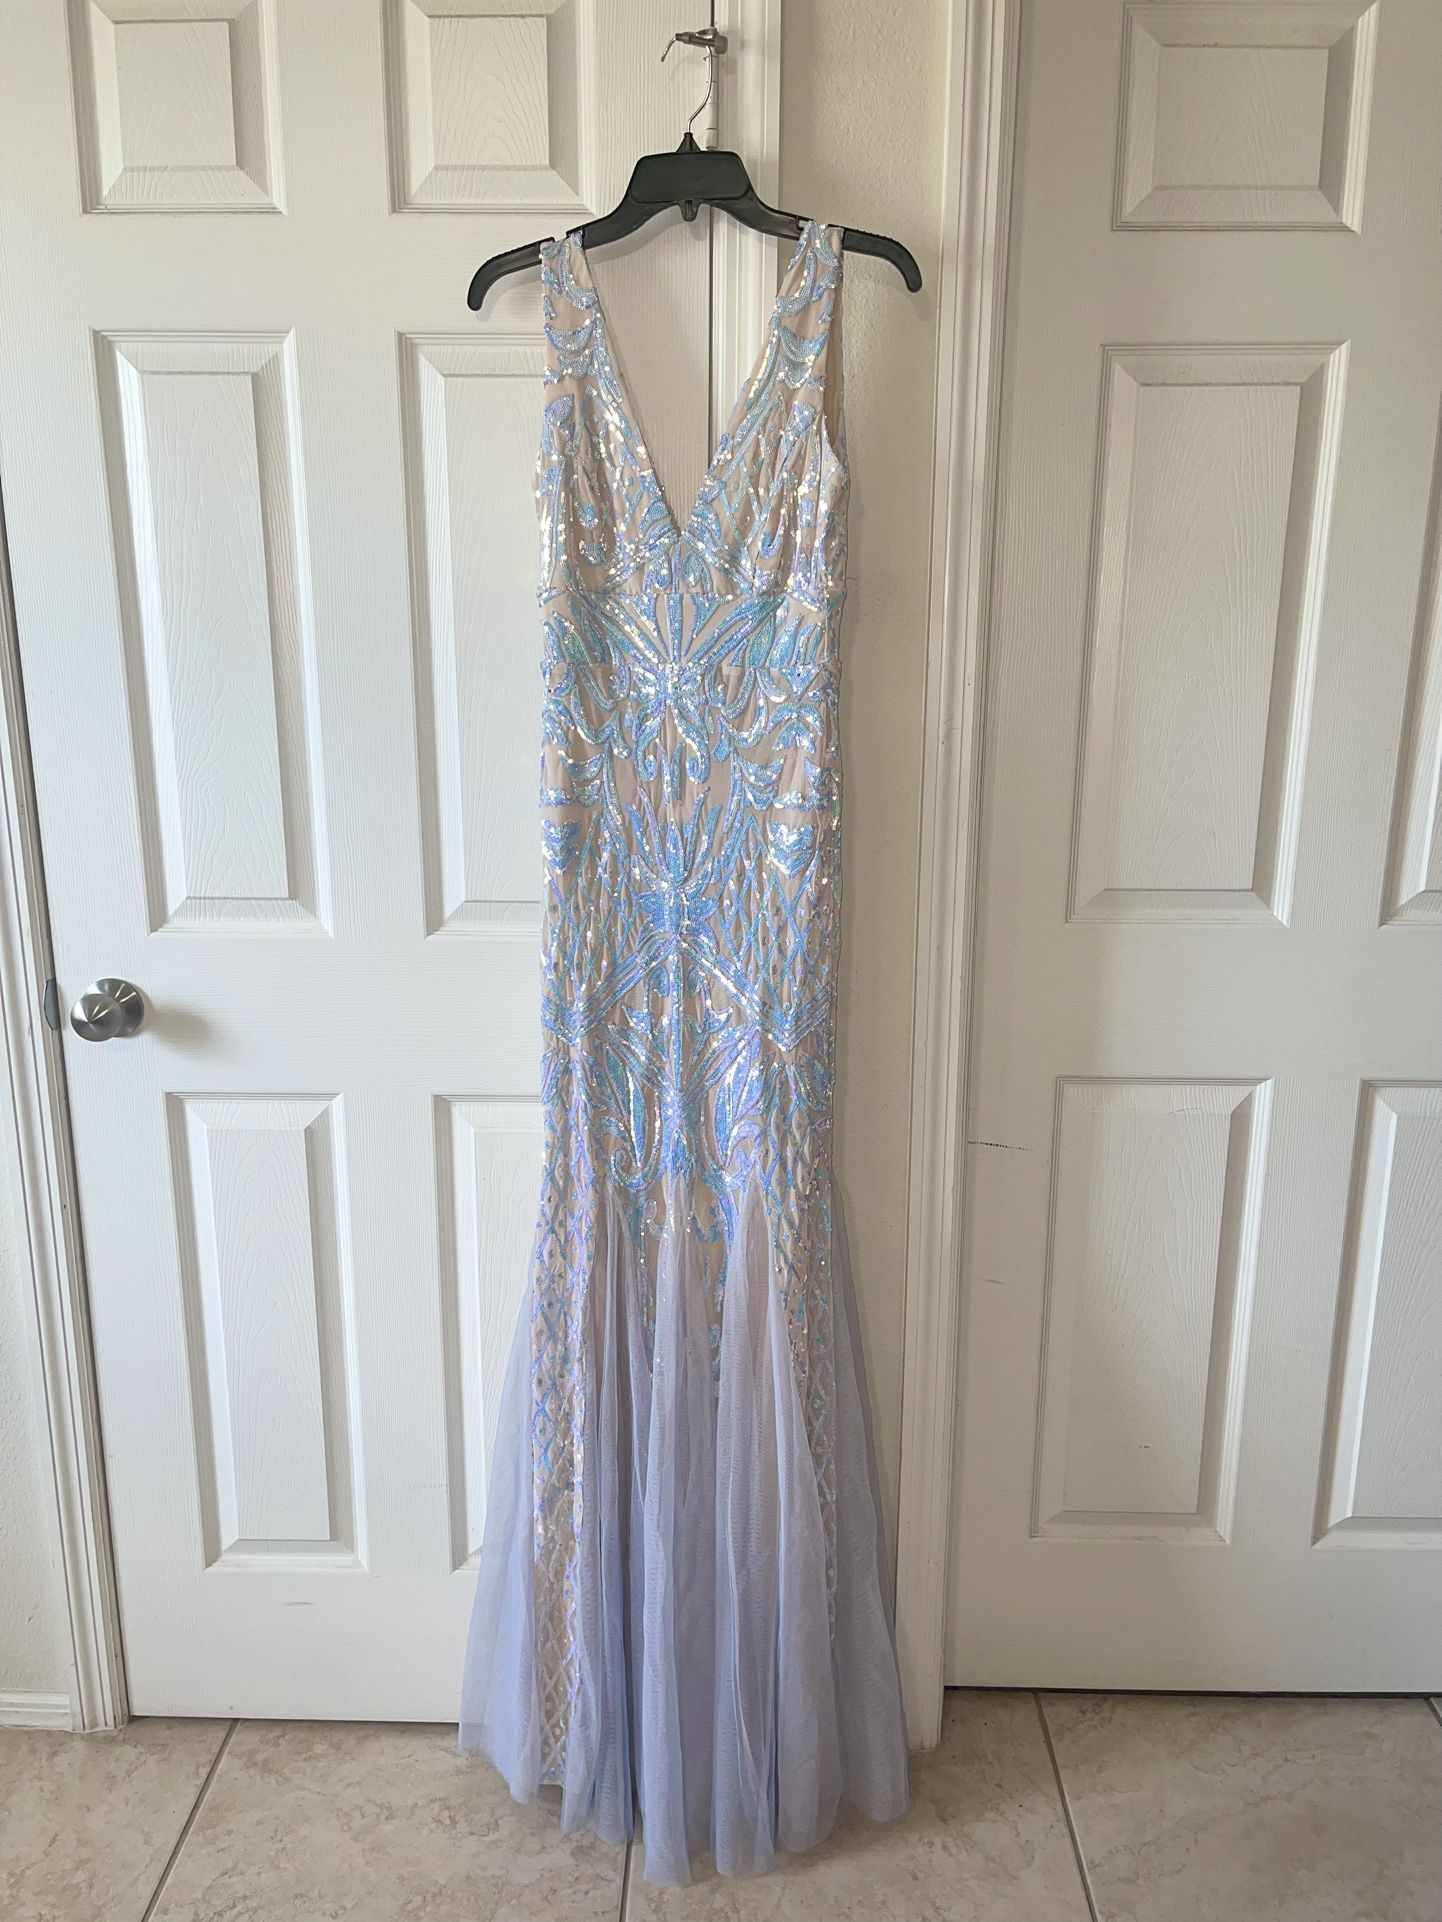 New Windsor Sequin Prom Dress/Gown (Small)